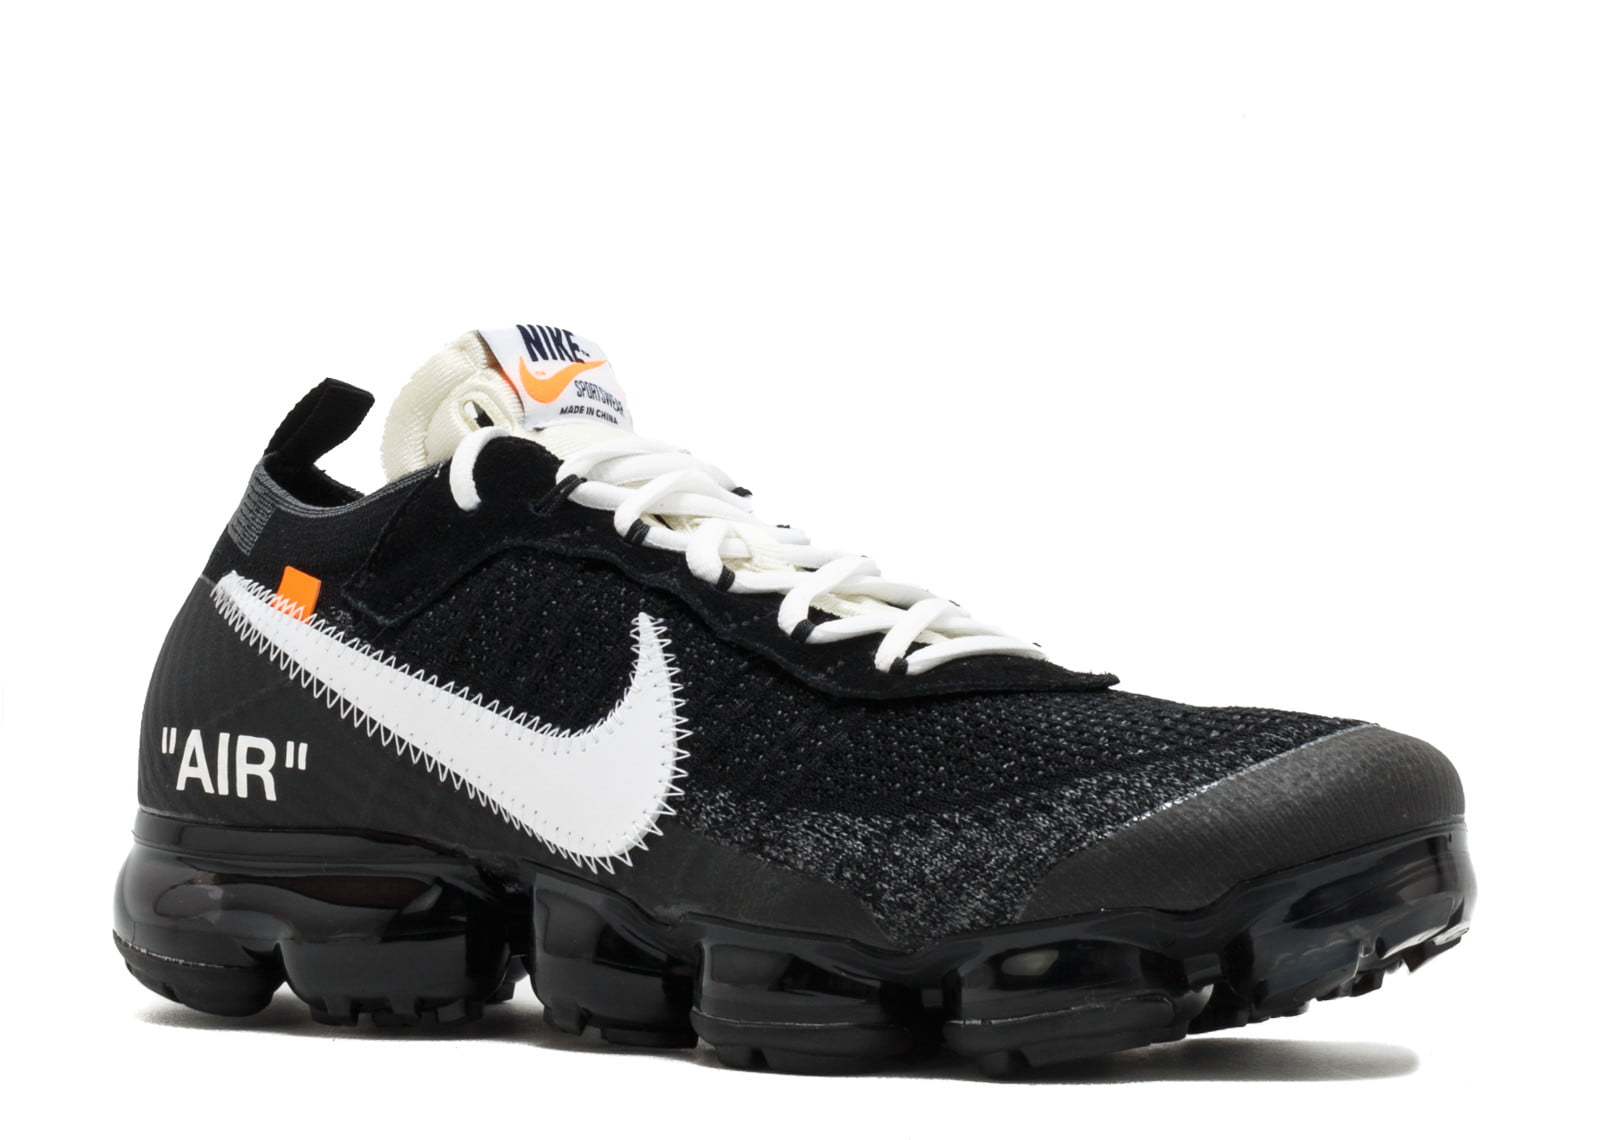 off white vapormax size 11